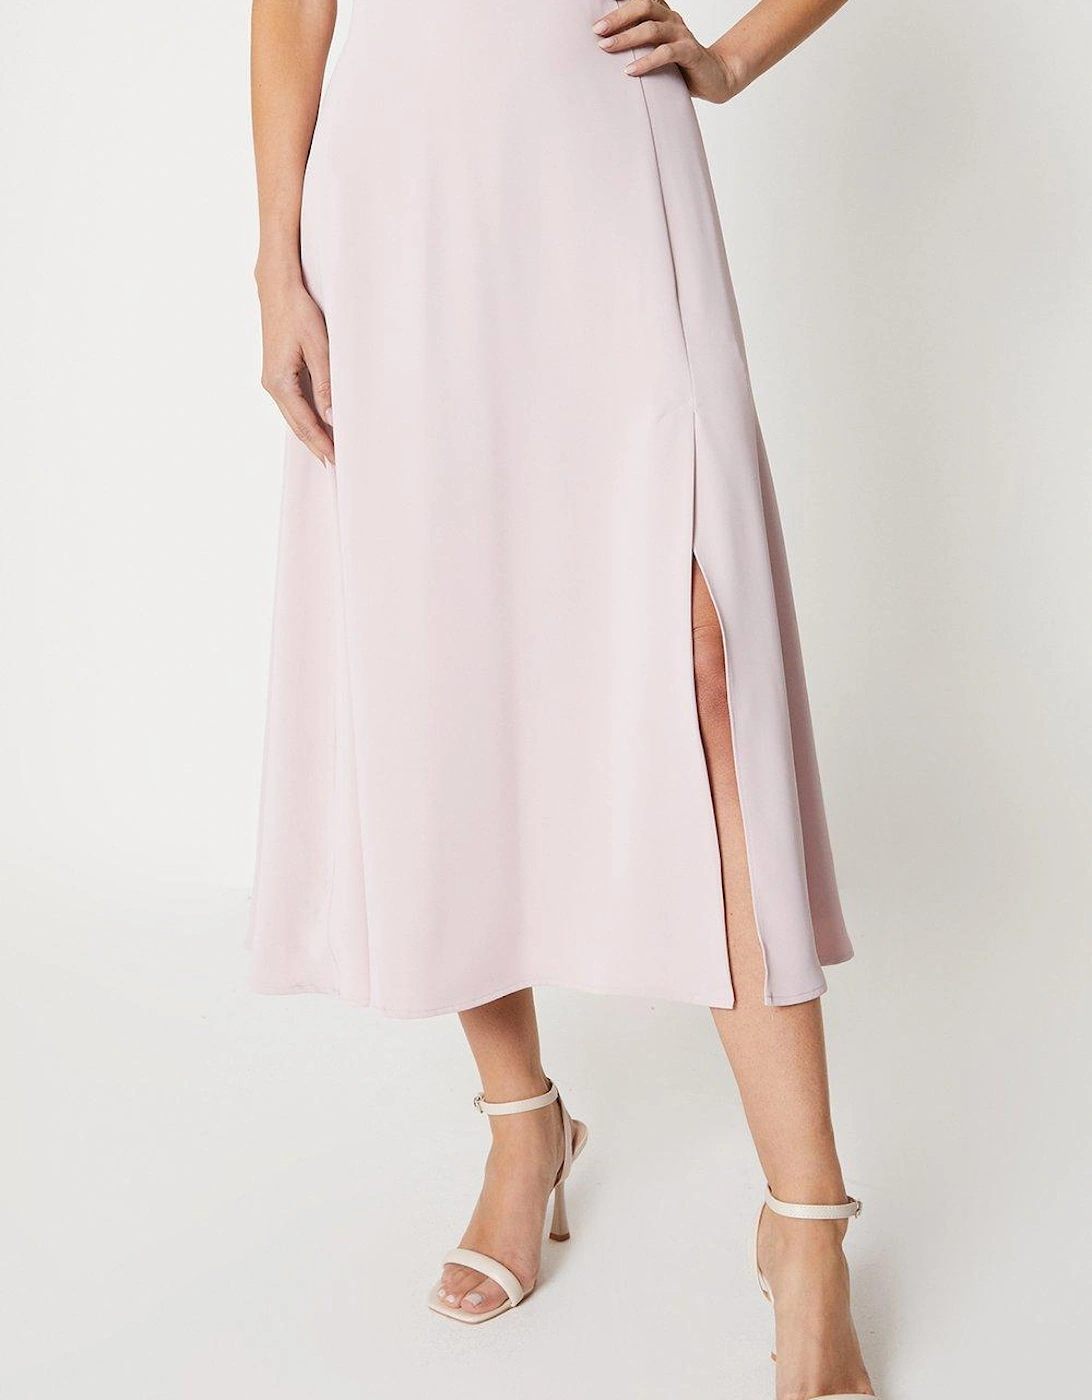 Midi Dress With High Neck & Flare Skirt